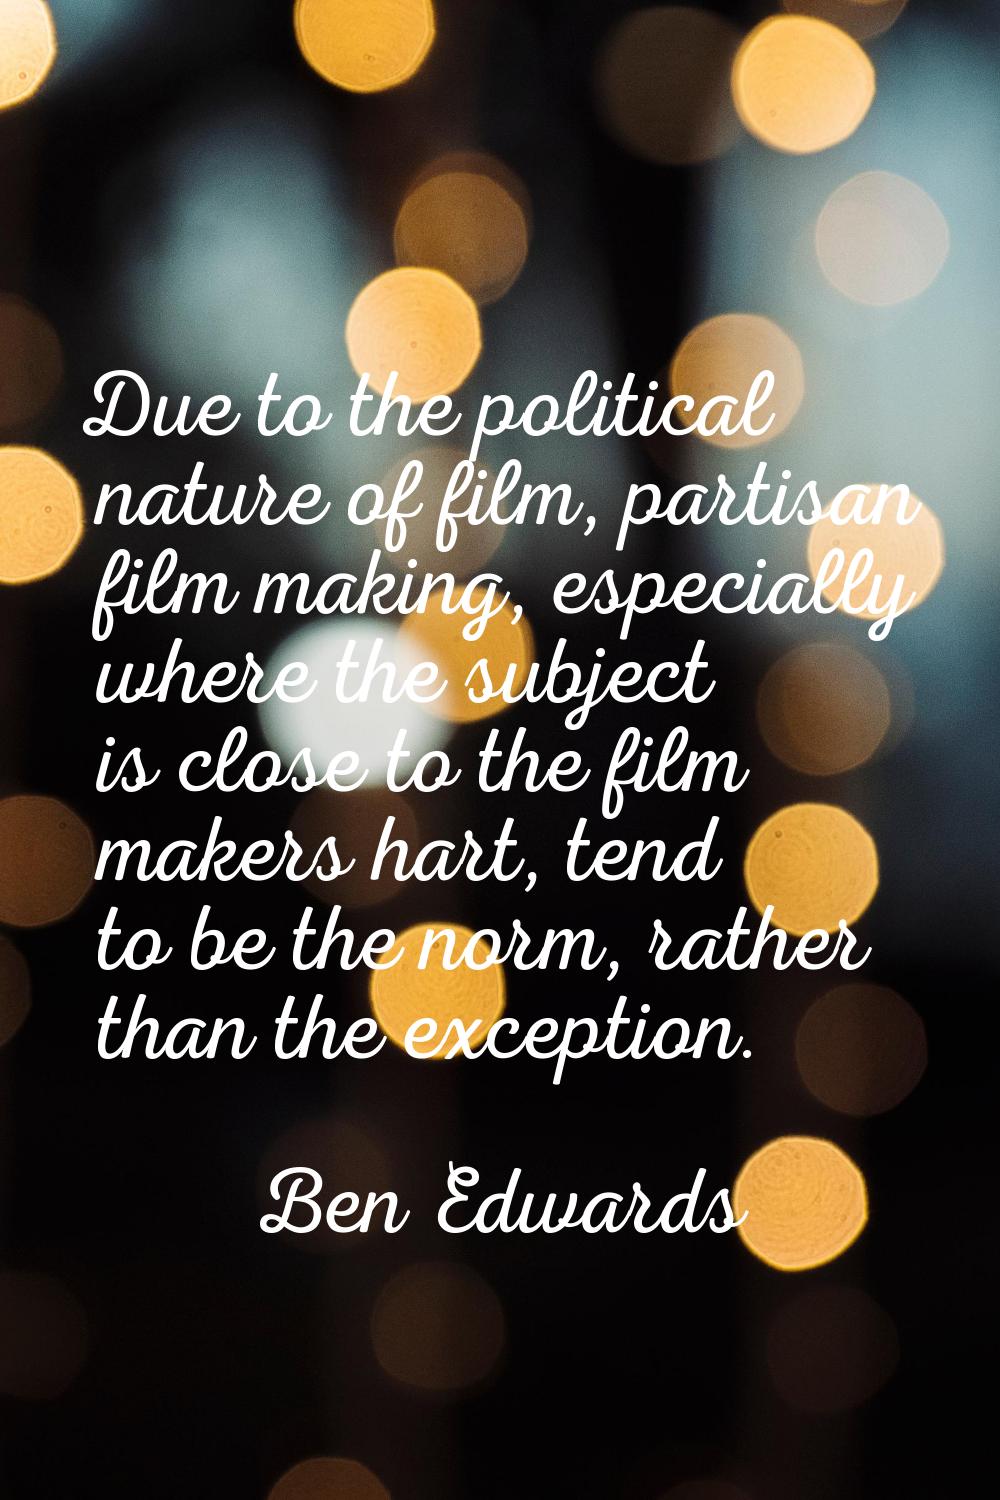 Due to the political nature of film, partisan film making, especially where the subject is close to